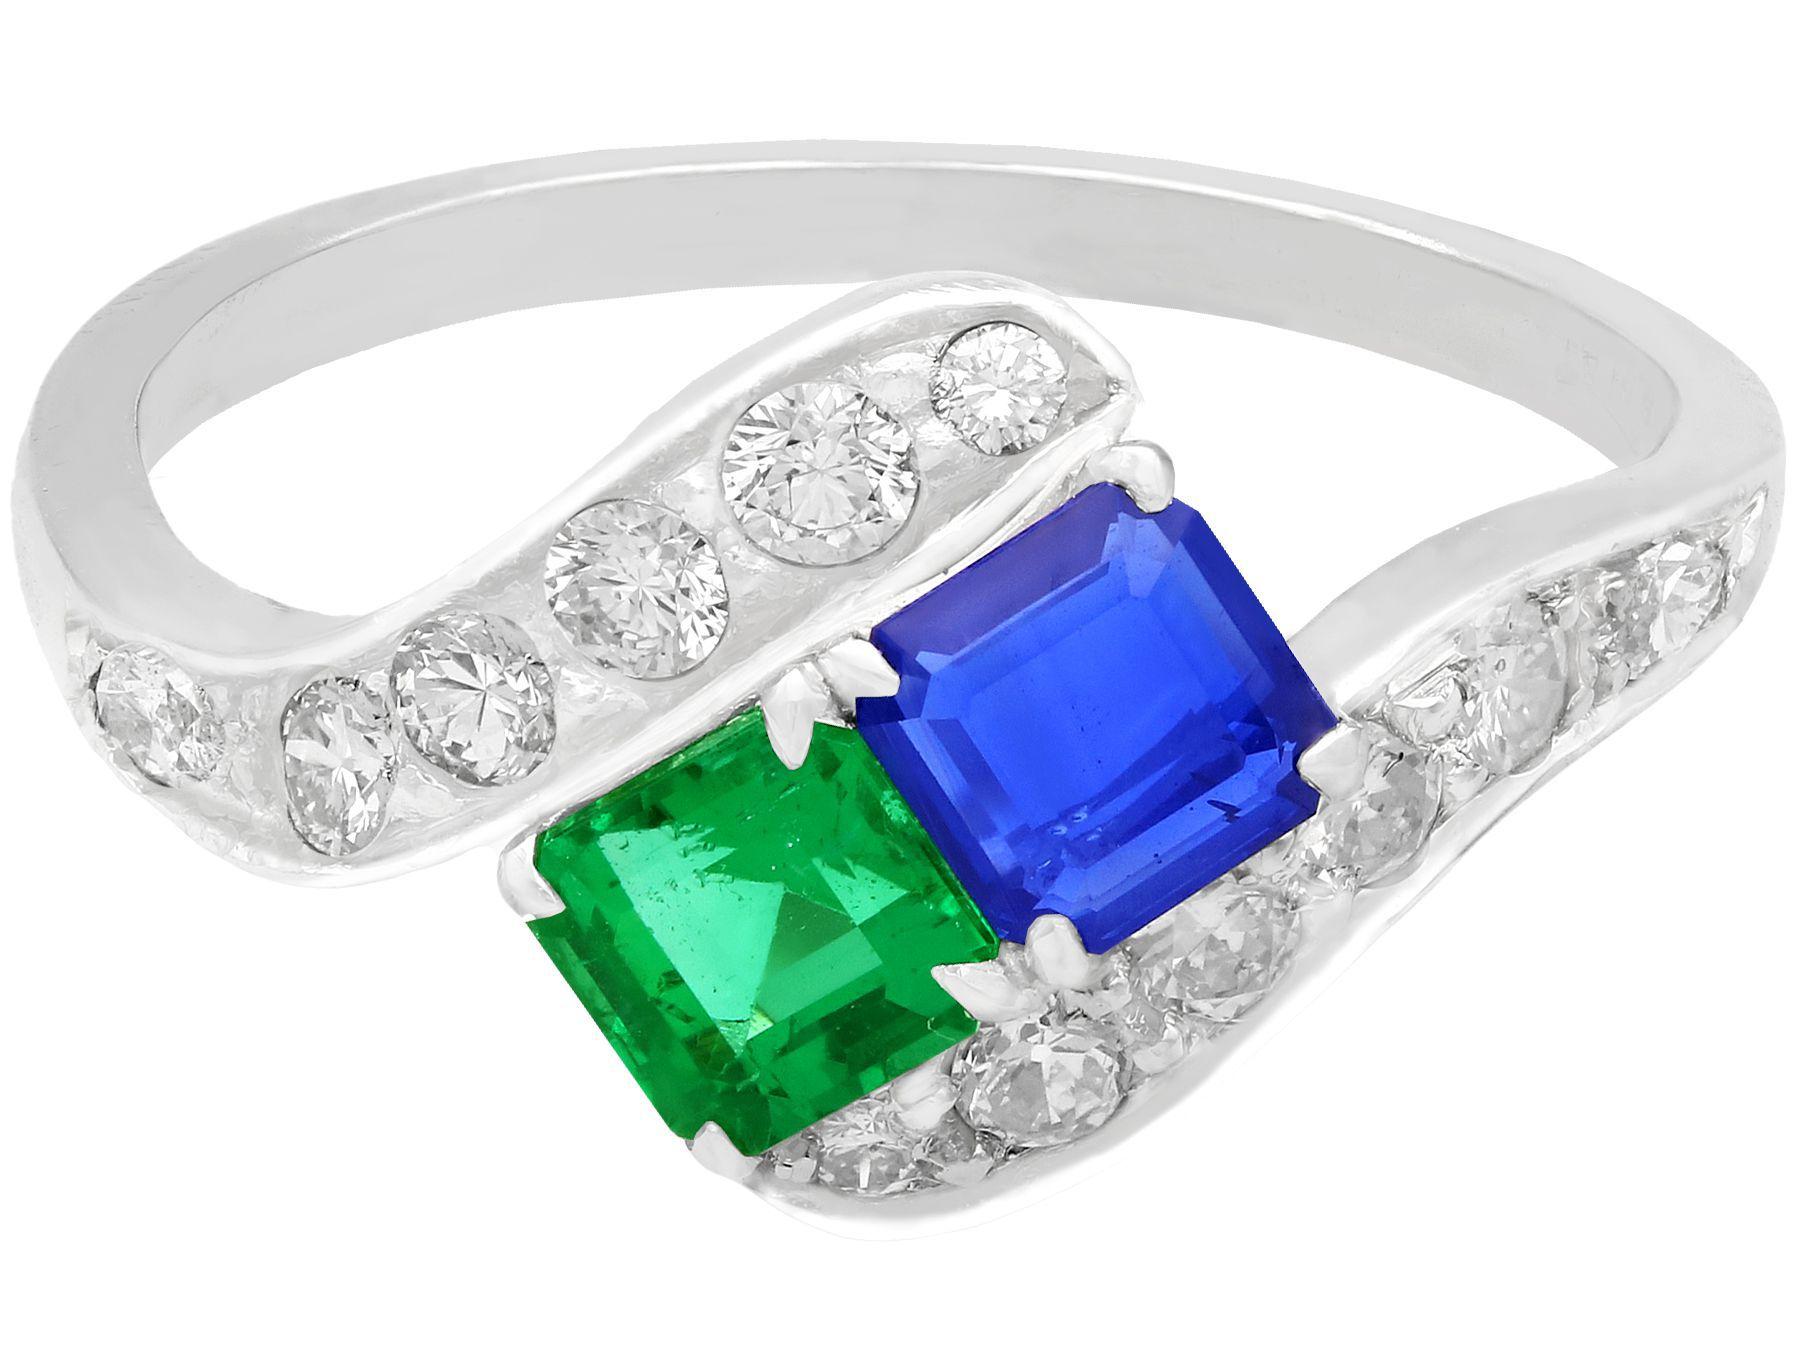 Vintage 1950s Sapphire and Emerald Diamond and Platinum Twist Ring In Excellent Condition For Sale In Jesmond, Newcastle Upon Tyne